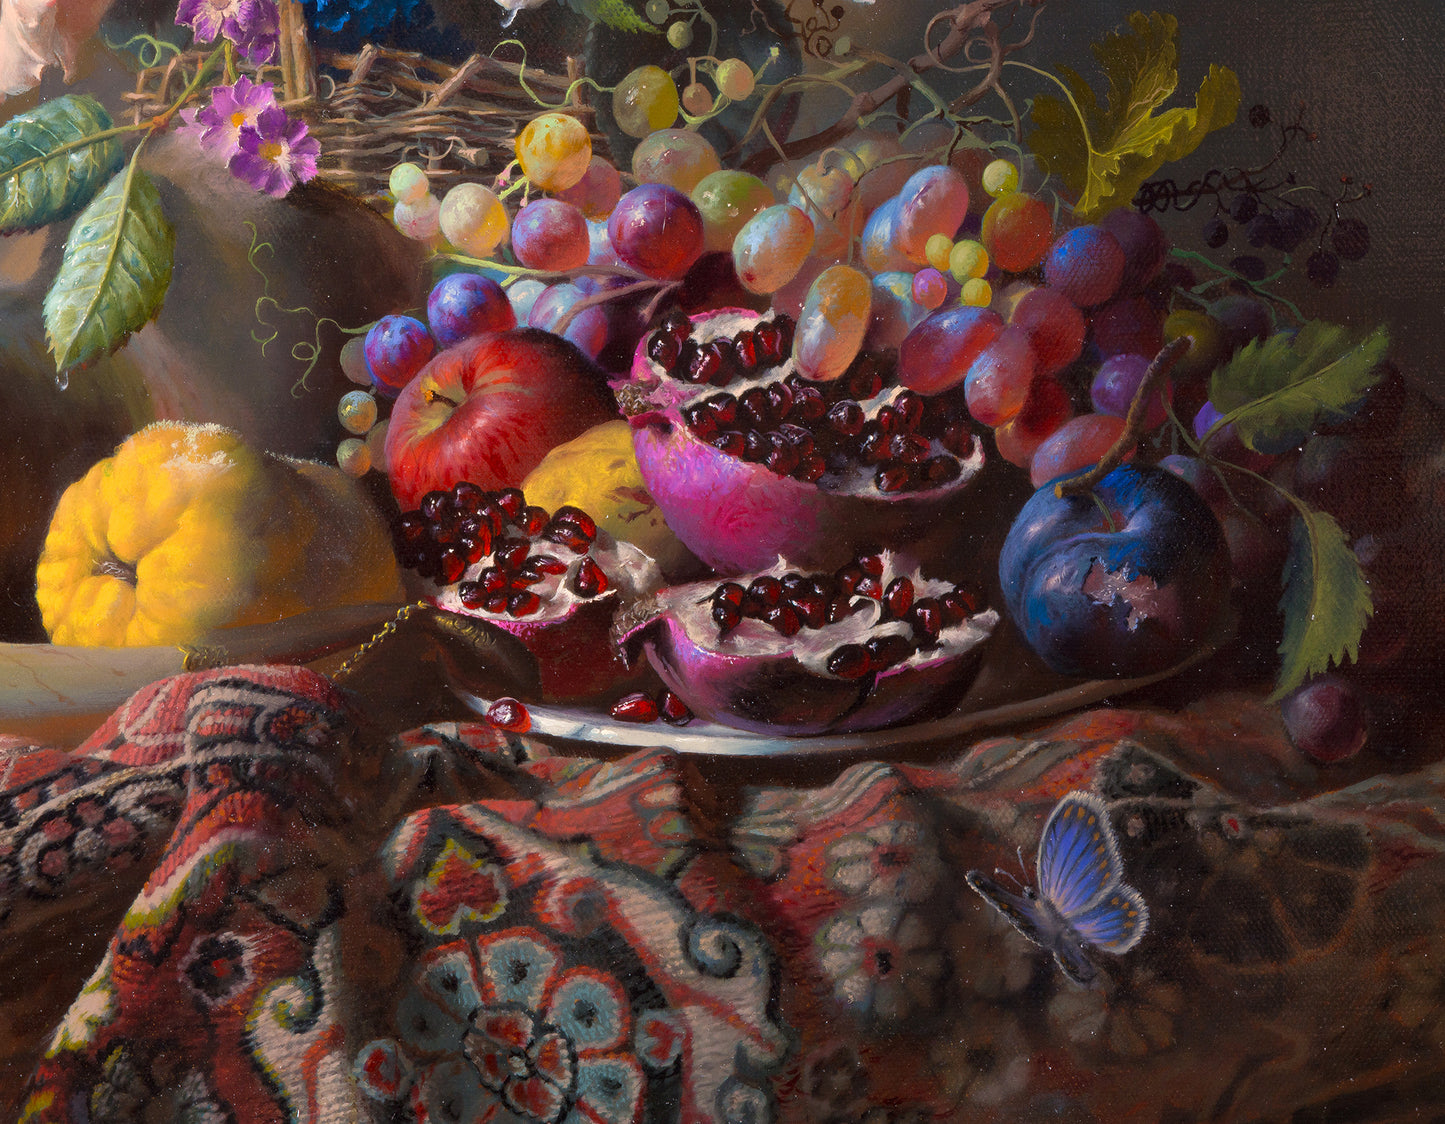 Fragment #2 from "Gifts of Earth and Heaven" "Fruit" 18x14 Giclée Print on Archival Art Paper